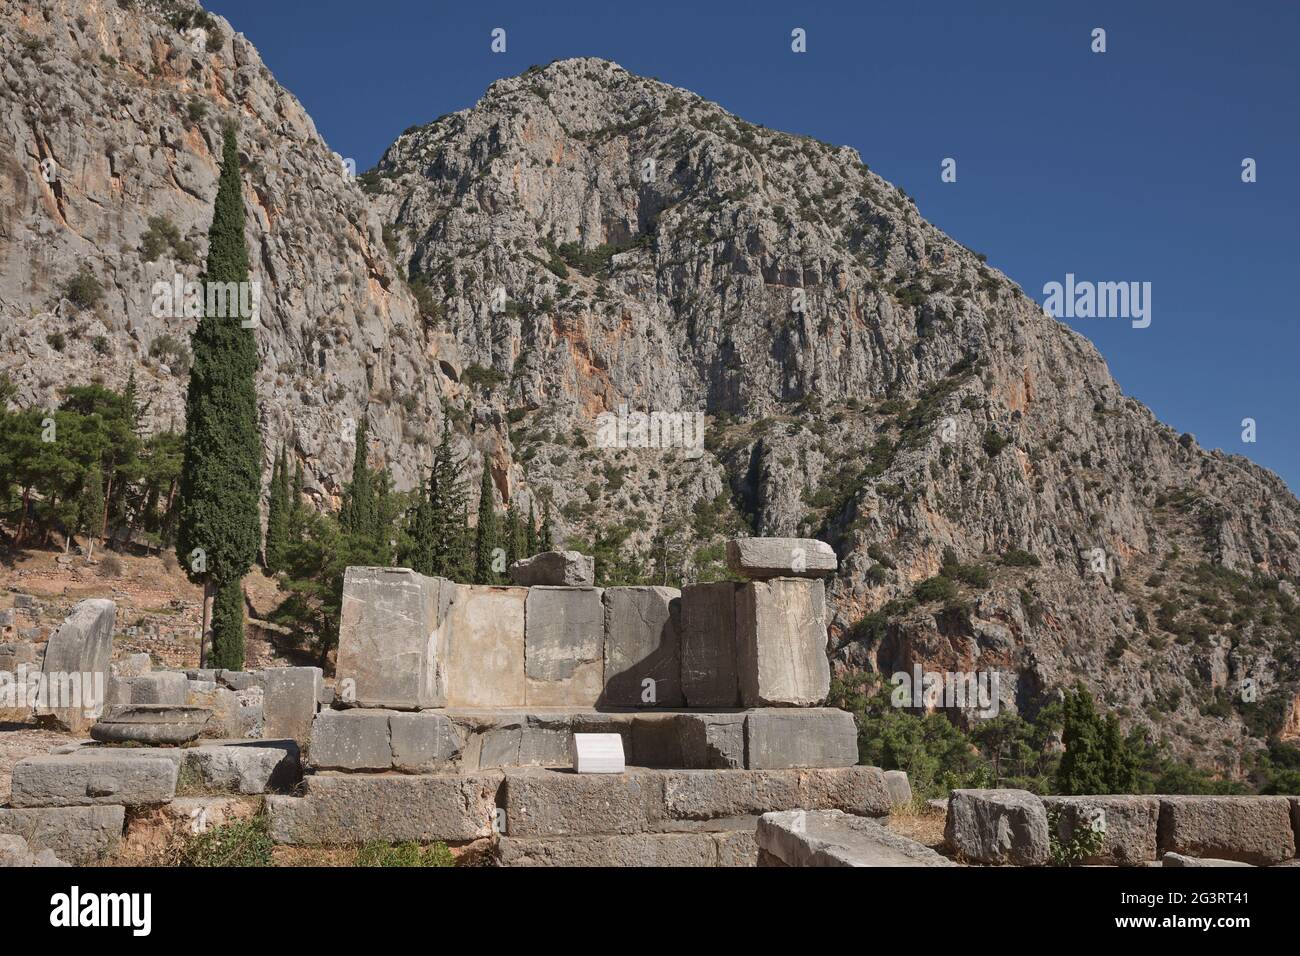 Archaelogical site of Delphi, Greece. Delphi is ancient sanctuary that grew rich as seat of oracle that was consulted on importa Stock Photo